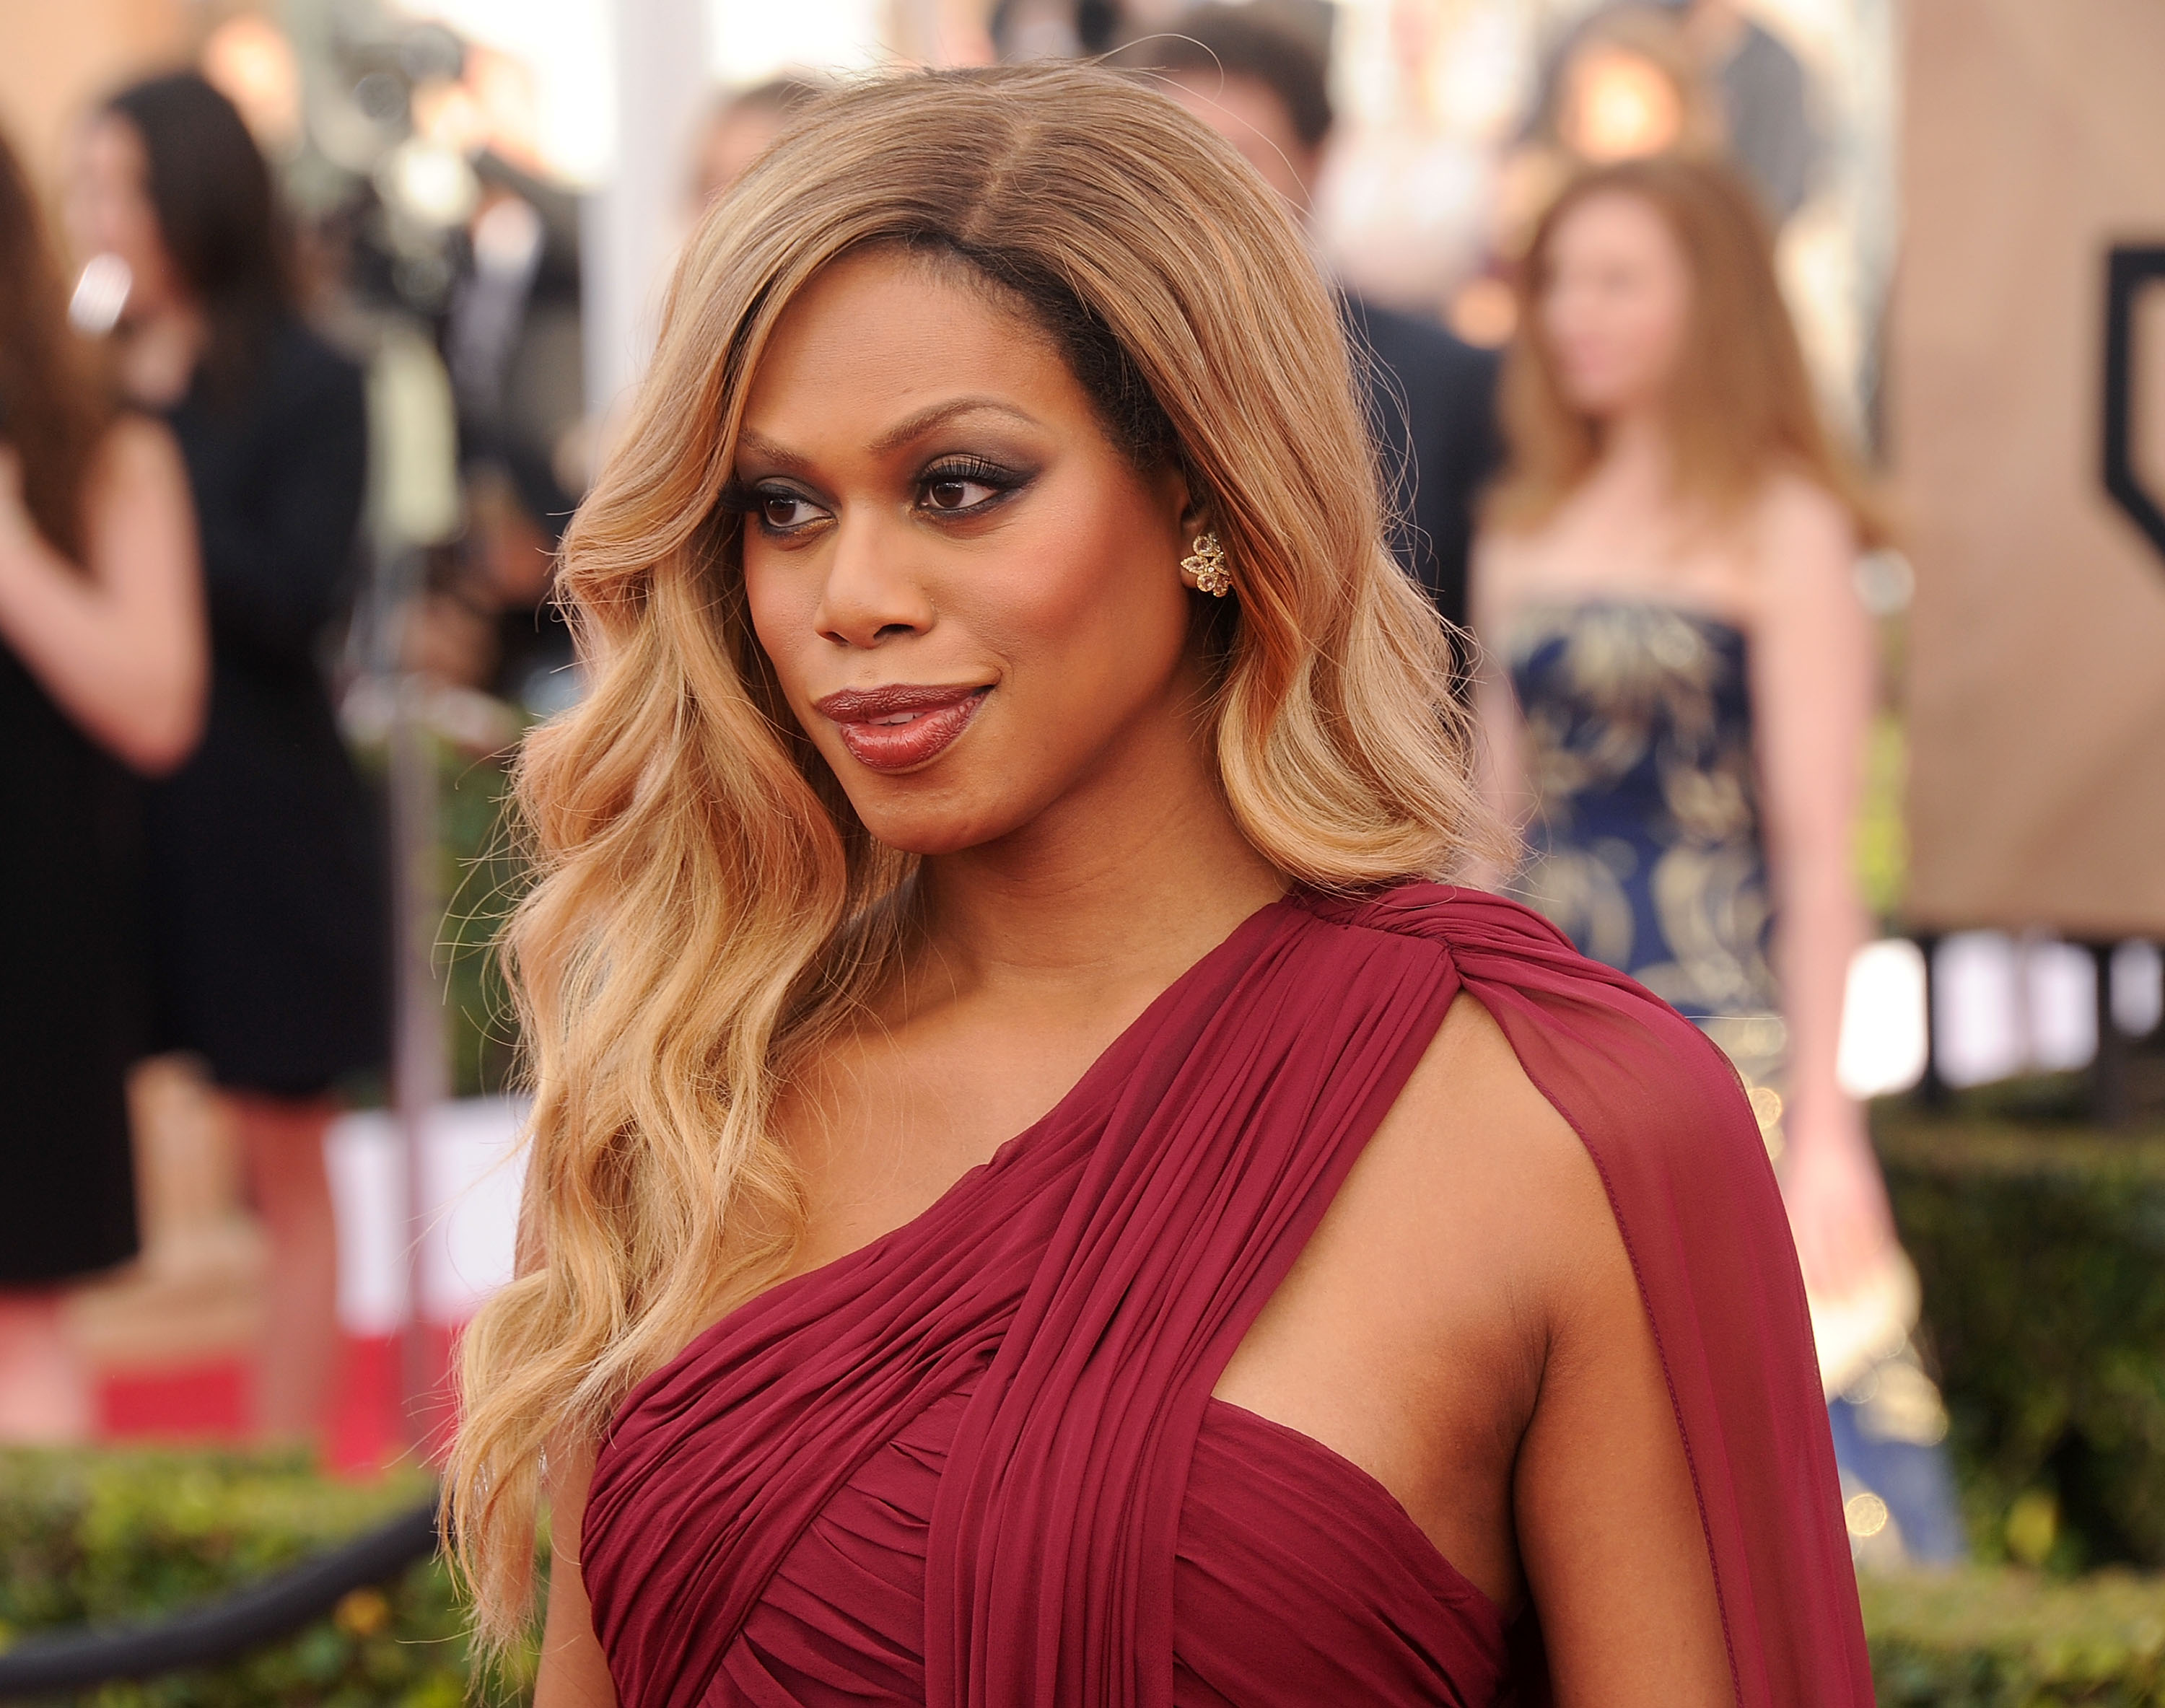 Actress Laverne Cox arrives at the 22nd Annual Screen Actors Guild Awards at The Shrine Auditorium on January 30, 2016 in Los Angeles, California. (Gregg DeGuire&mdash;WireImage/Getty Images)